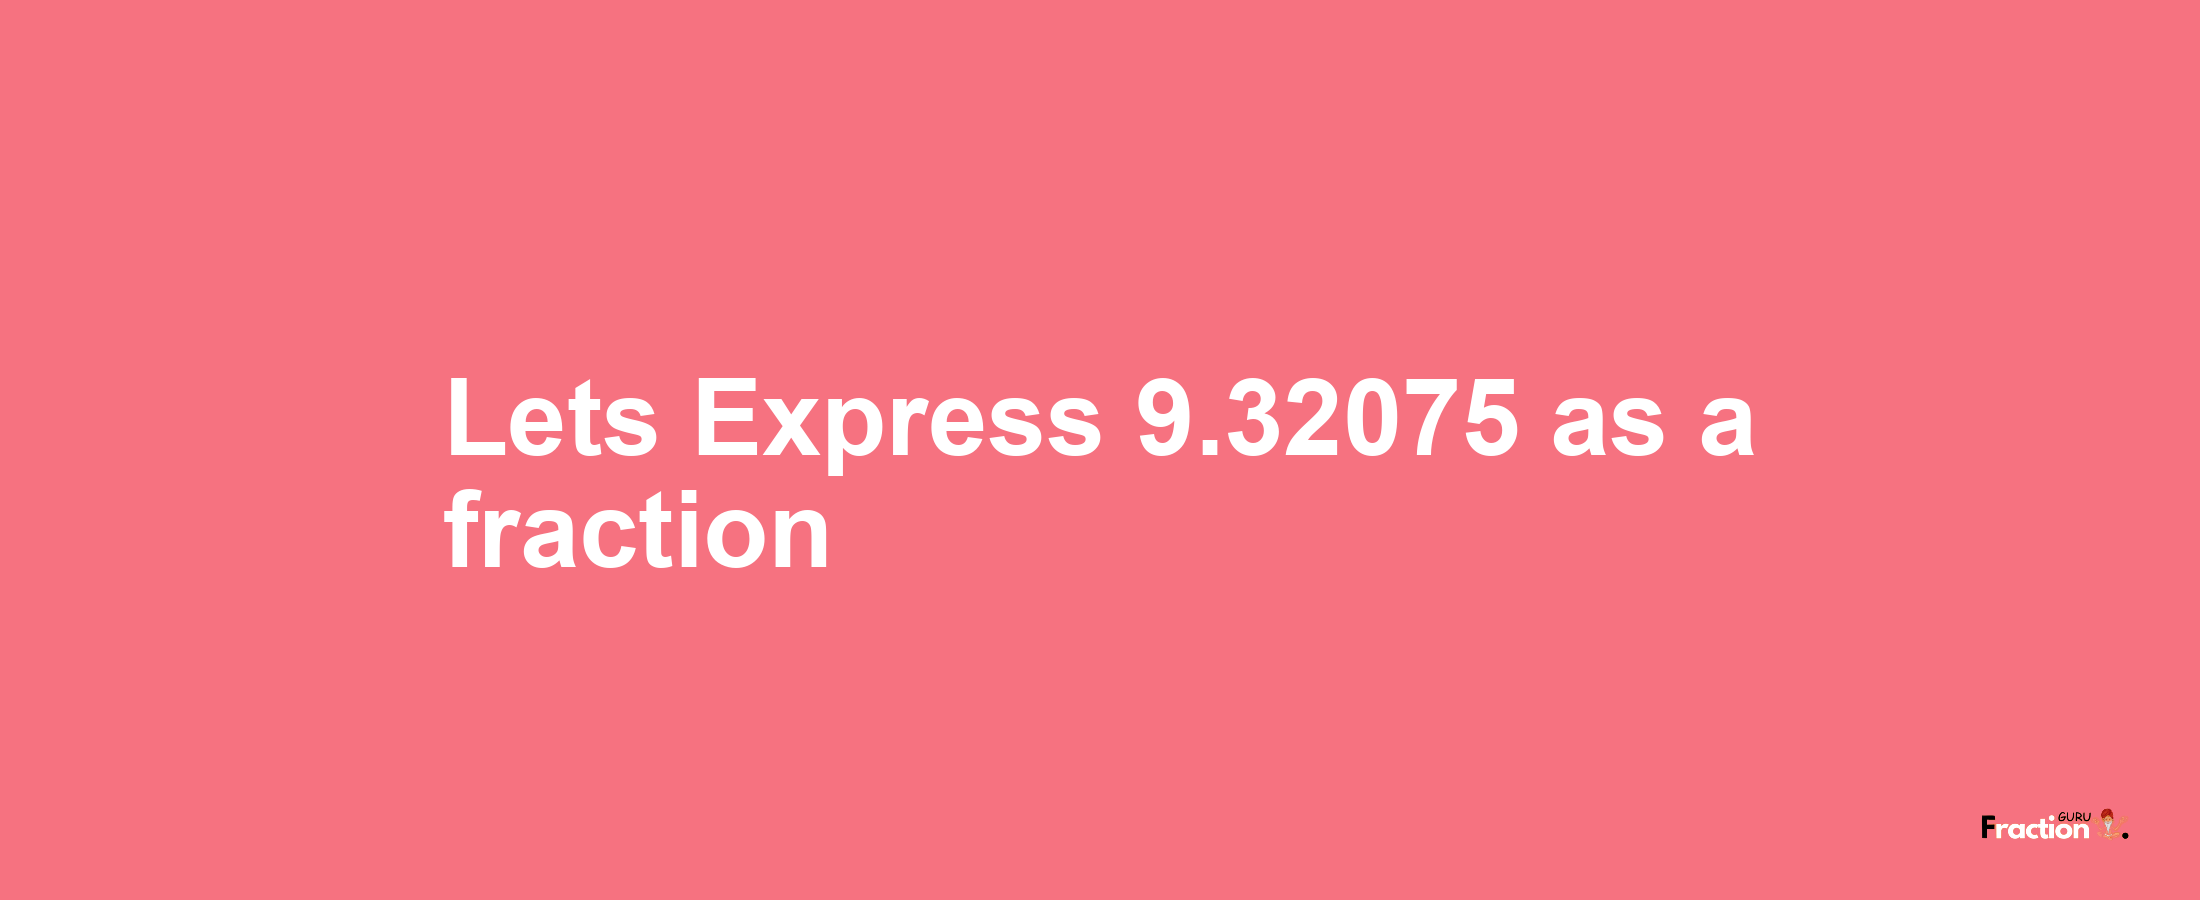 Lets Express 9.32075 as afraction